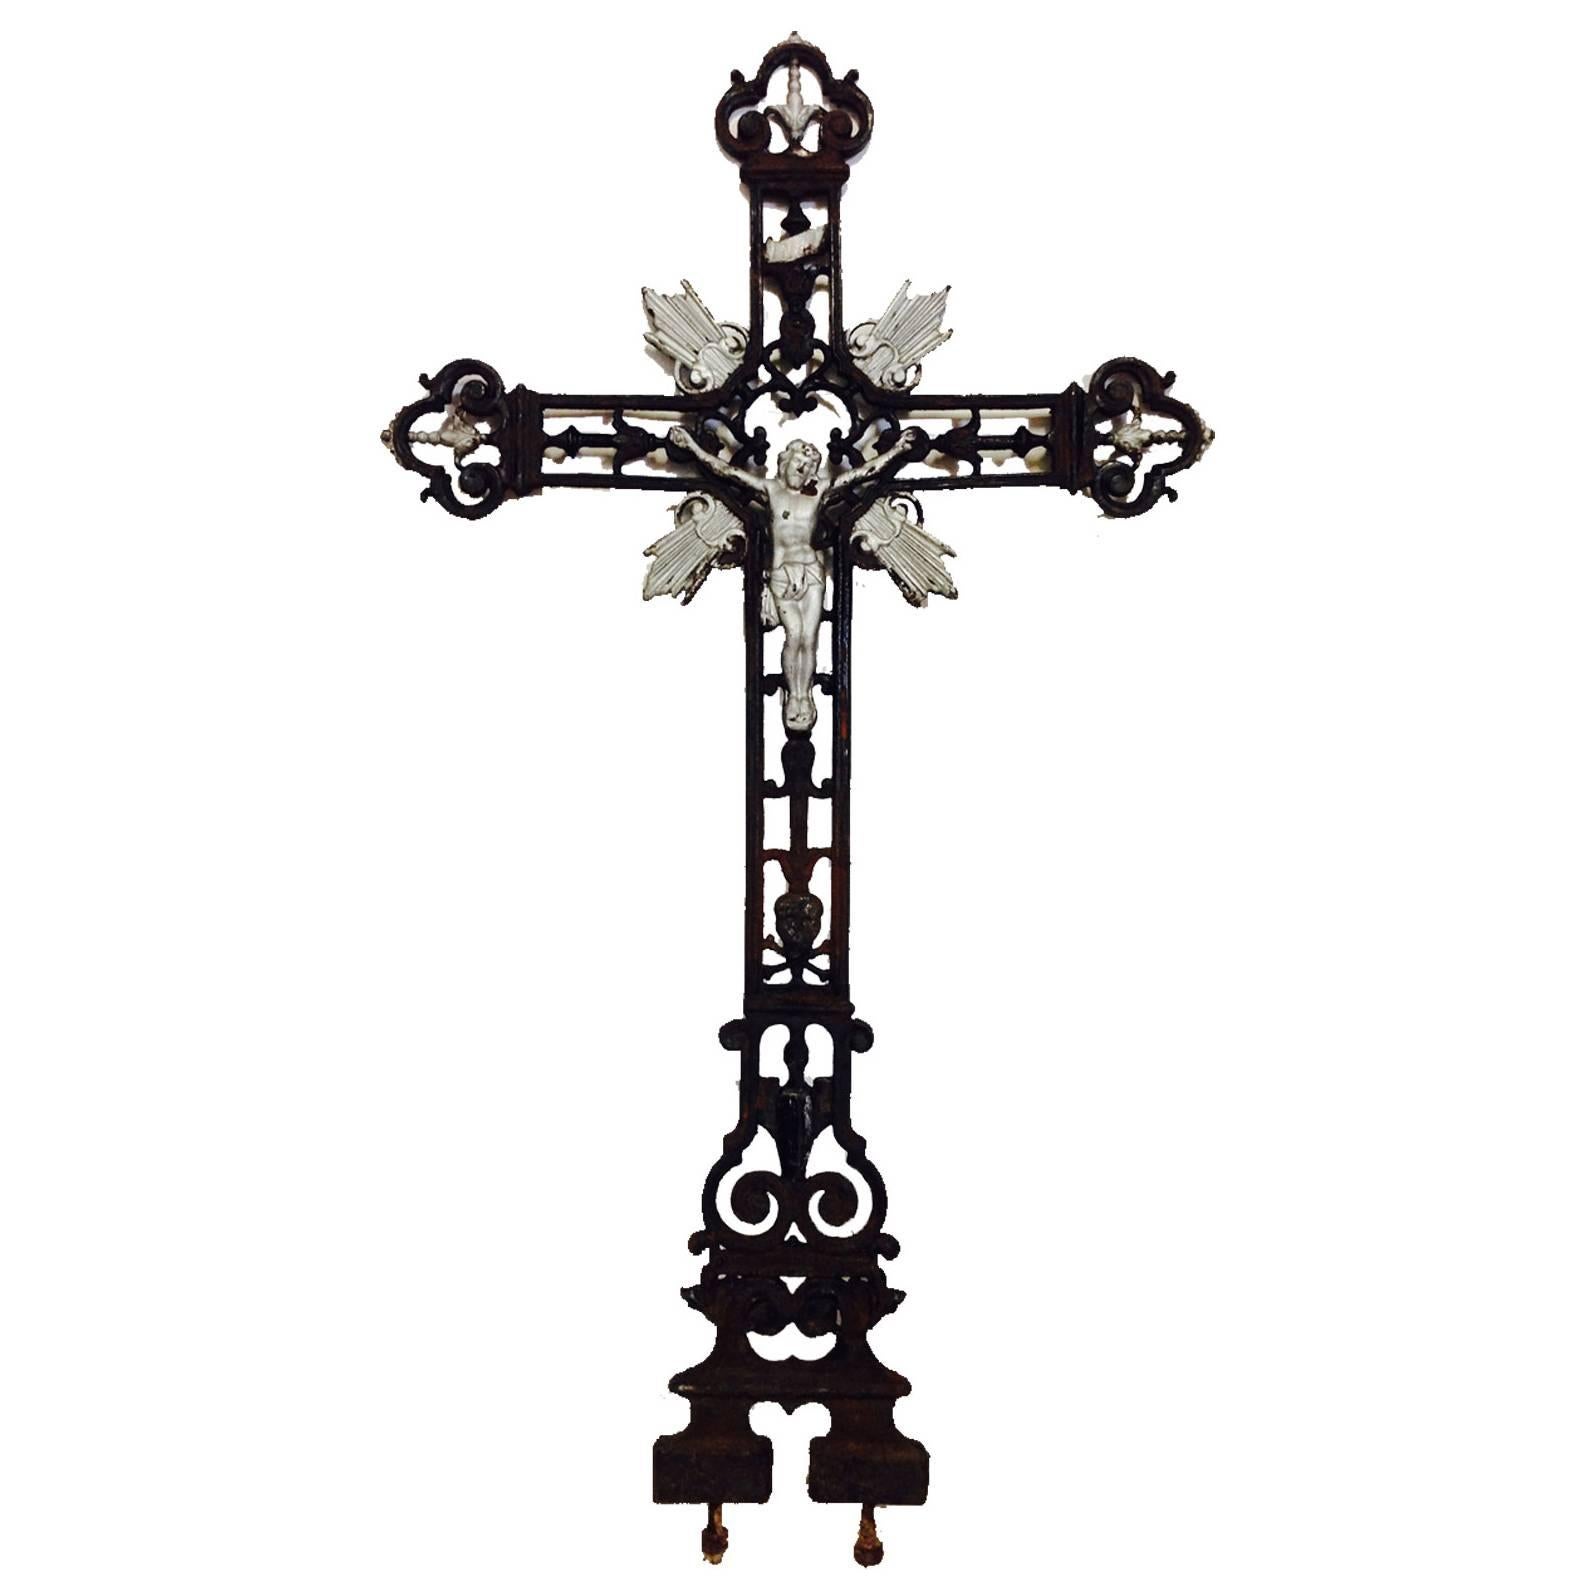 20th Century French Art Deco Style Architectural Cast Iron Grave Marke Crucifix